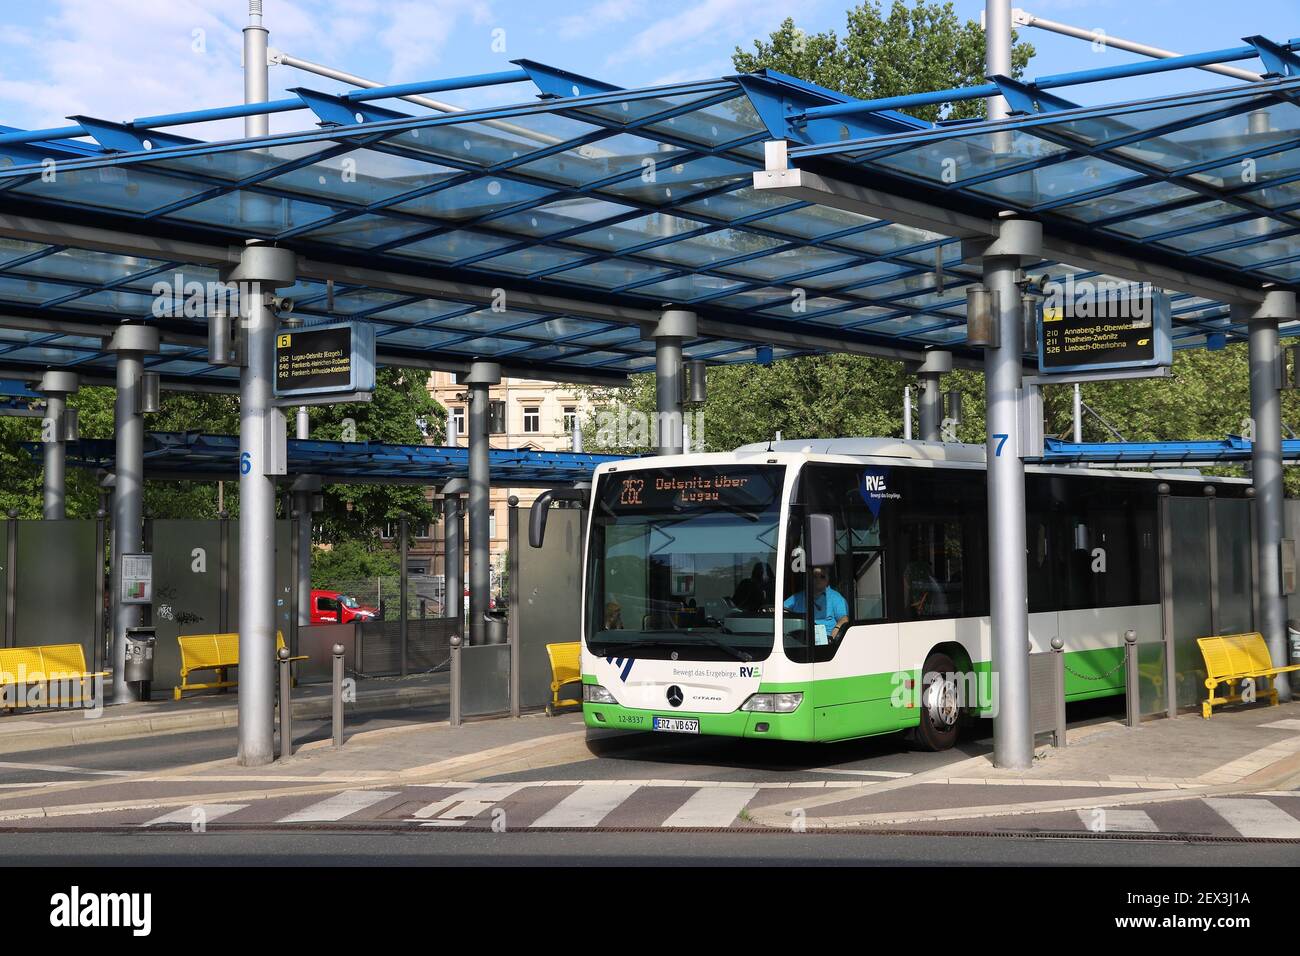 CHEMNITZ, GERMANY - MAY 9, 2018: Bus station (Omnibusbahnhof) in Chemnitz,  Germany. Chemnitz is the 3rd-largest city in the Free State of Saxony (Germ  Stock Photo - Alamy